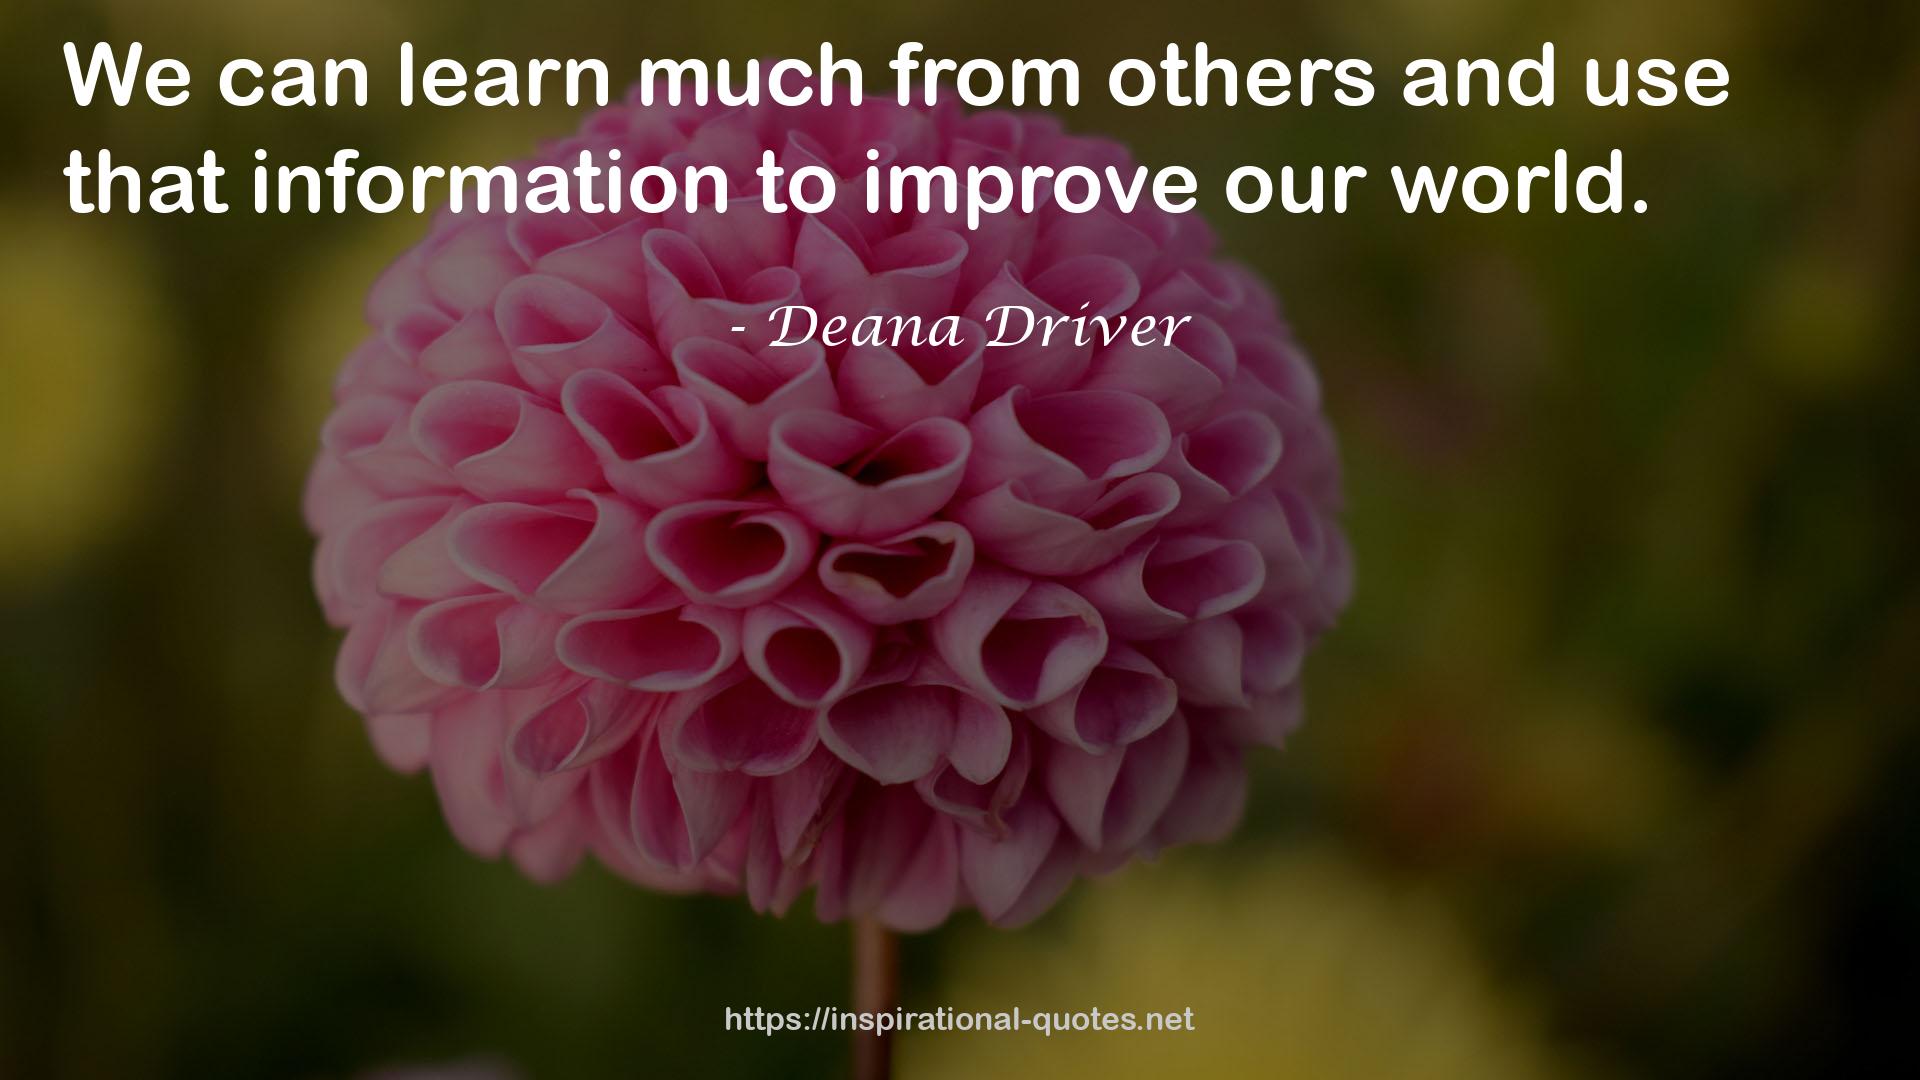 Deana Driver QUOTES